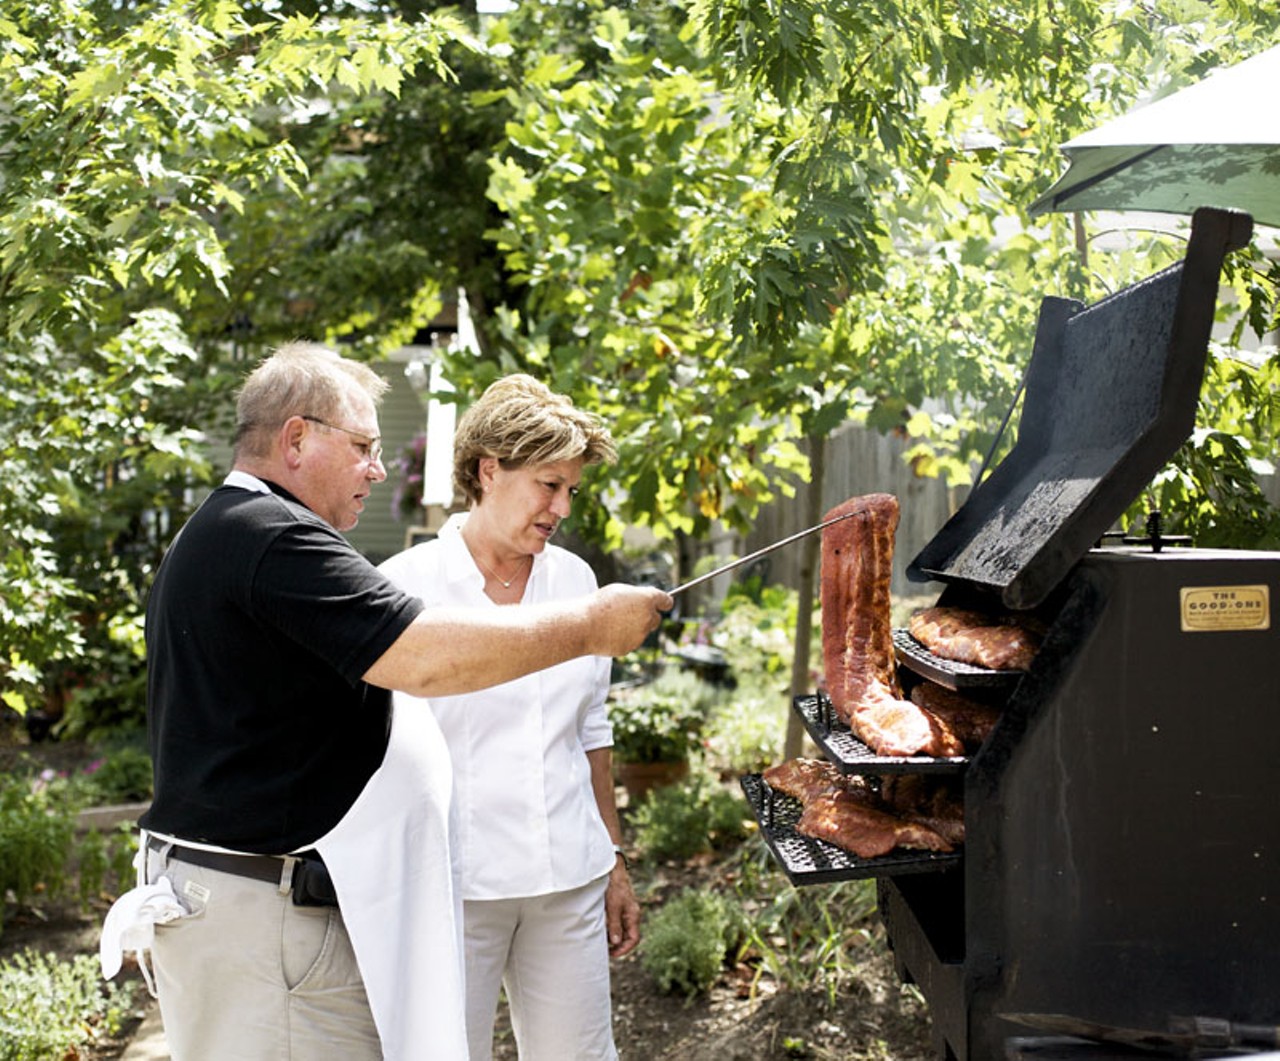 Owner's Maggie and Nick Collida checking on the ribs in the smoker behind the restaurant.